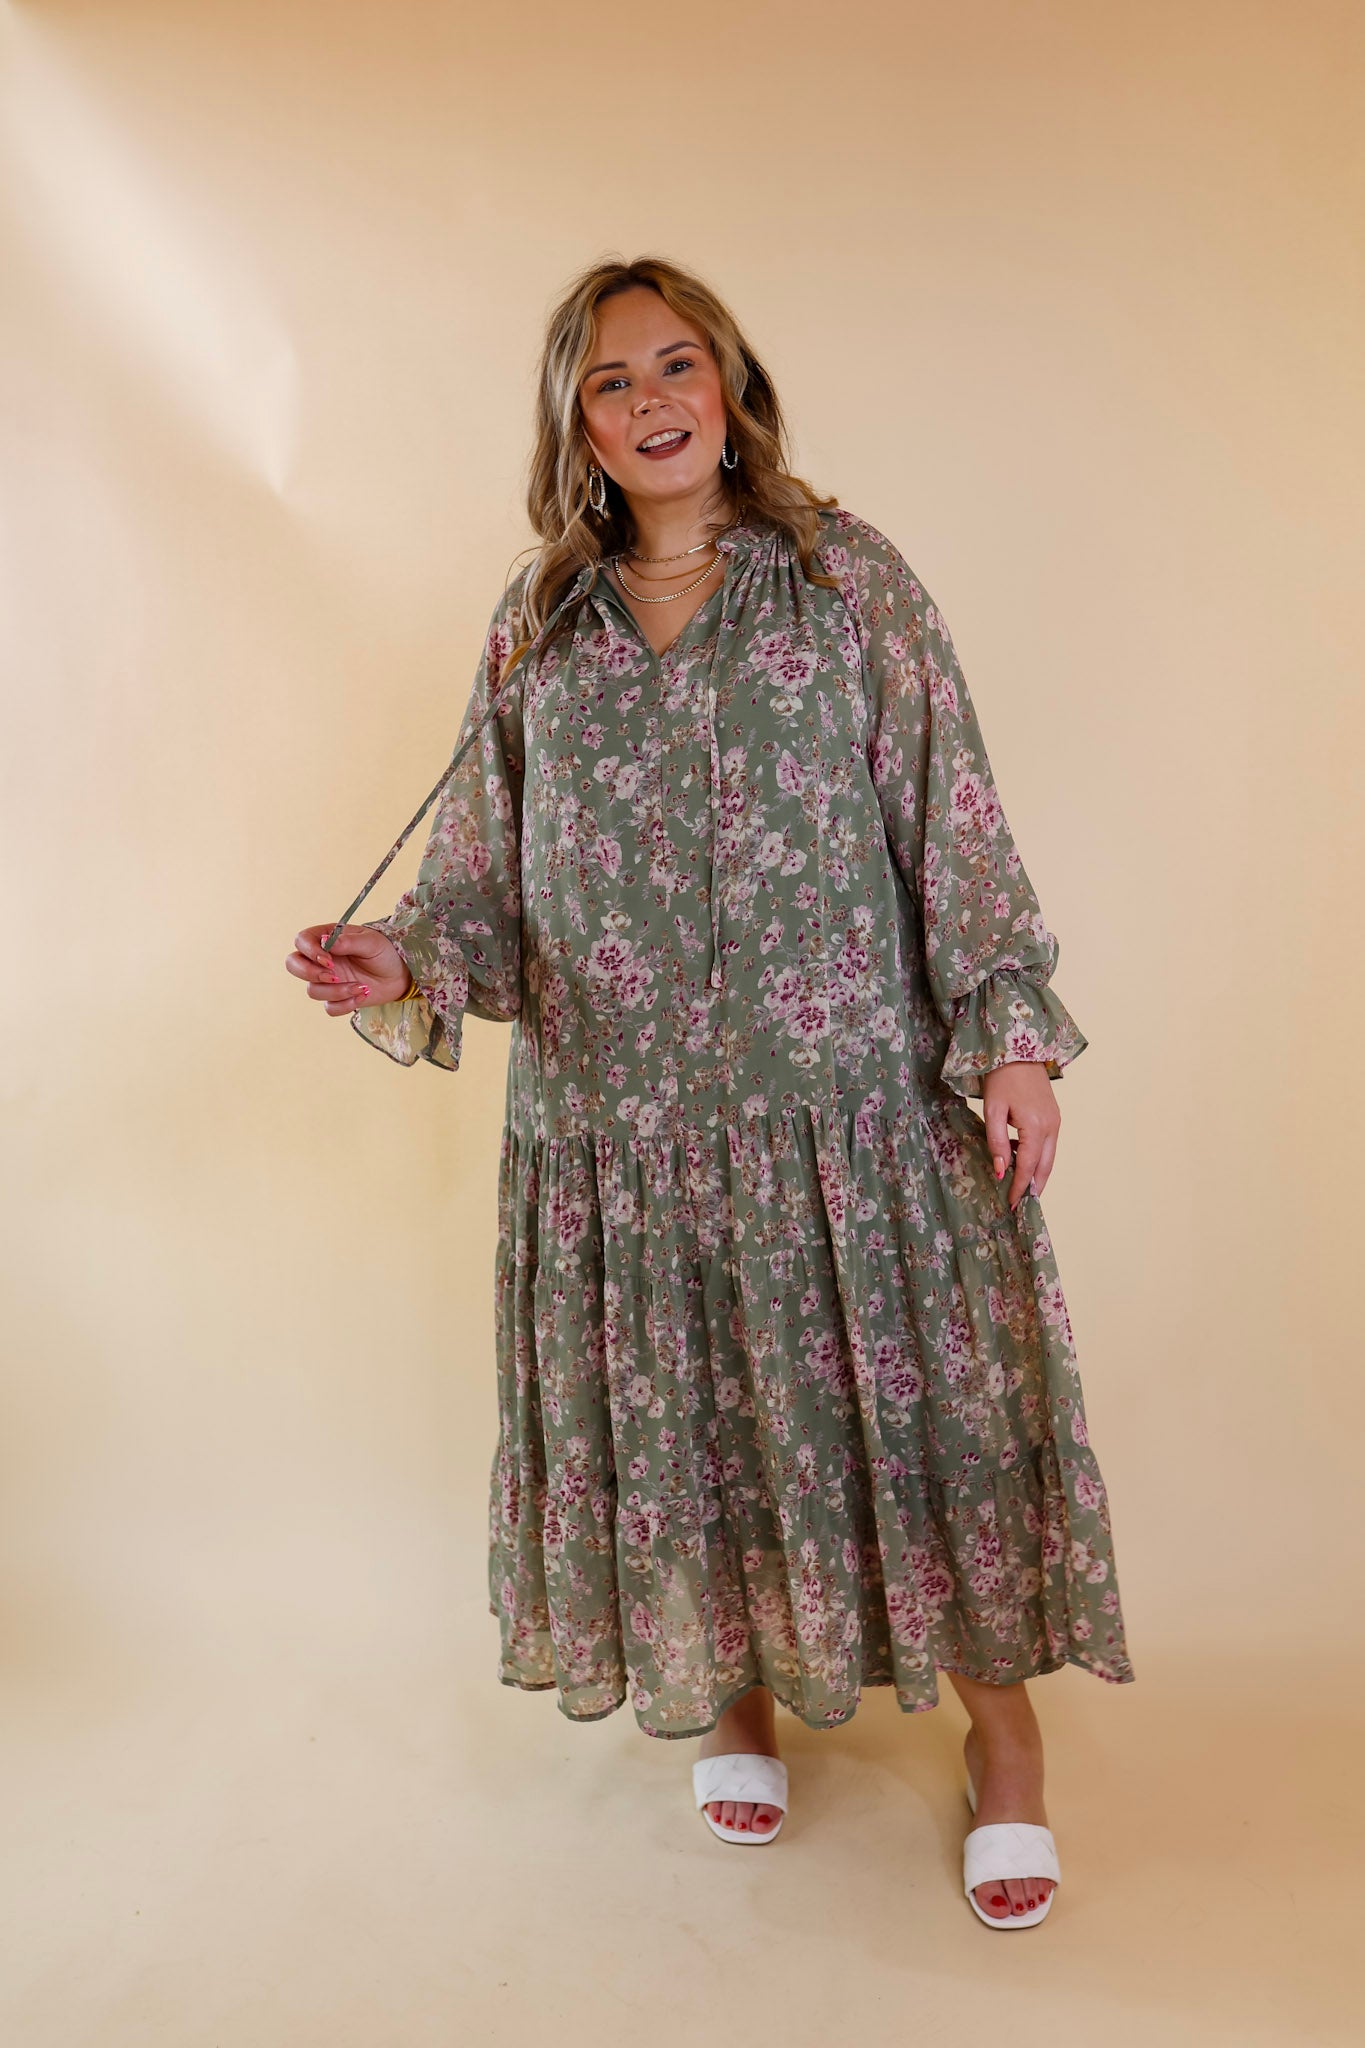 Tuscan Nights Long Sleeve High Neck Floral Midi Dress in Sage - Giddy Up Glamour Boutique